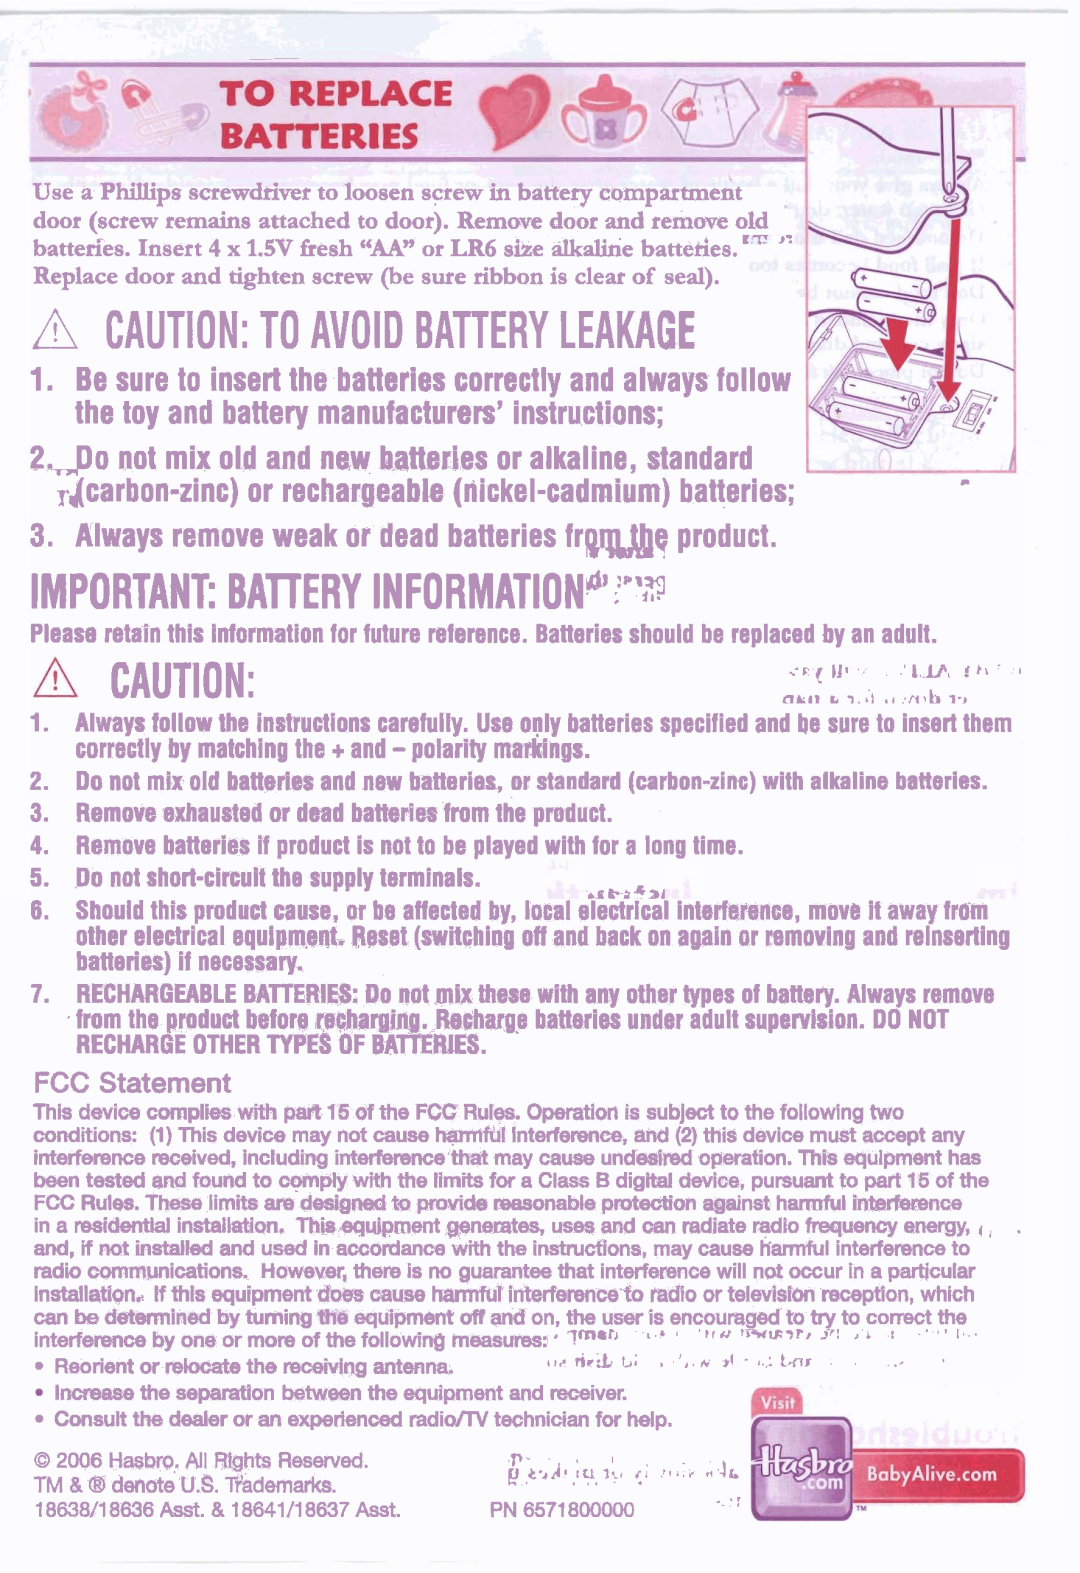 Hasbro 18641 Asst, 18638 Anst manual IMPORTANT BAllERY INFORMATIONP~~, A Caution To Avoid Battery Leakage, FCC Statement 